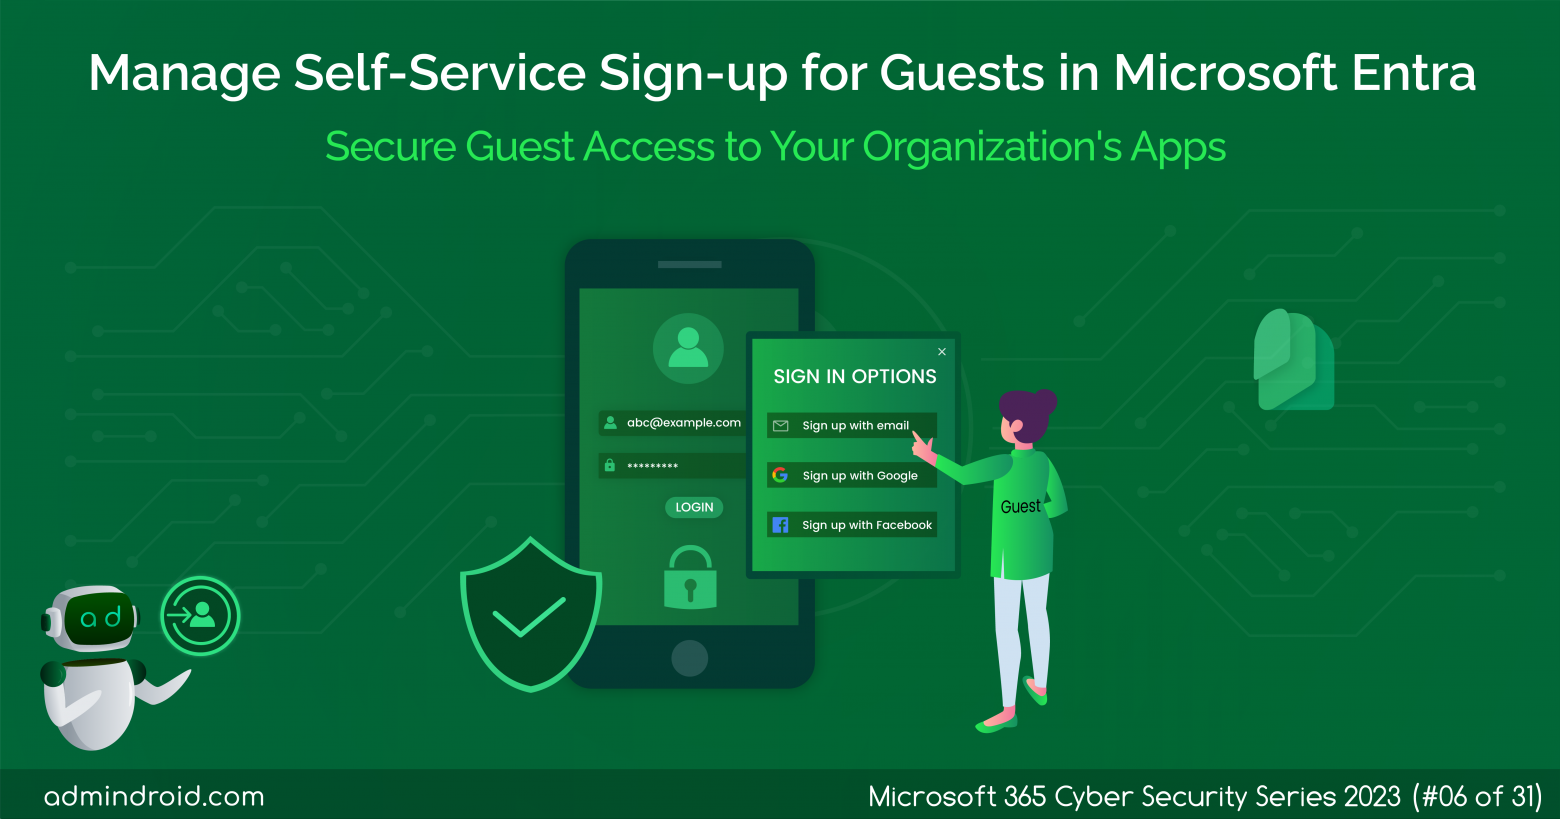 Manage Self-Service Sign-Up for Guests in Microsoft Entra